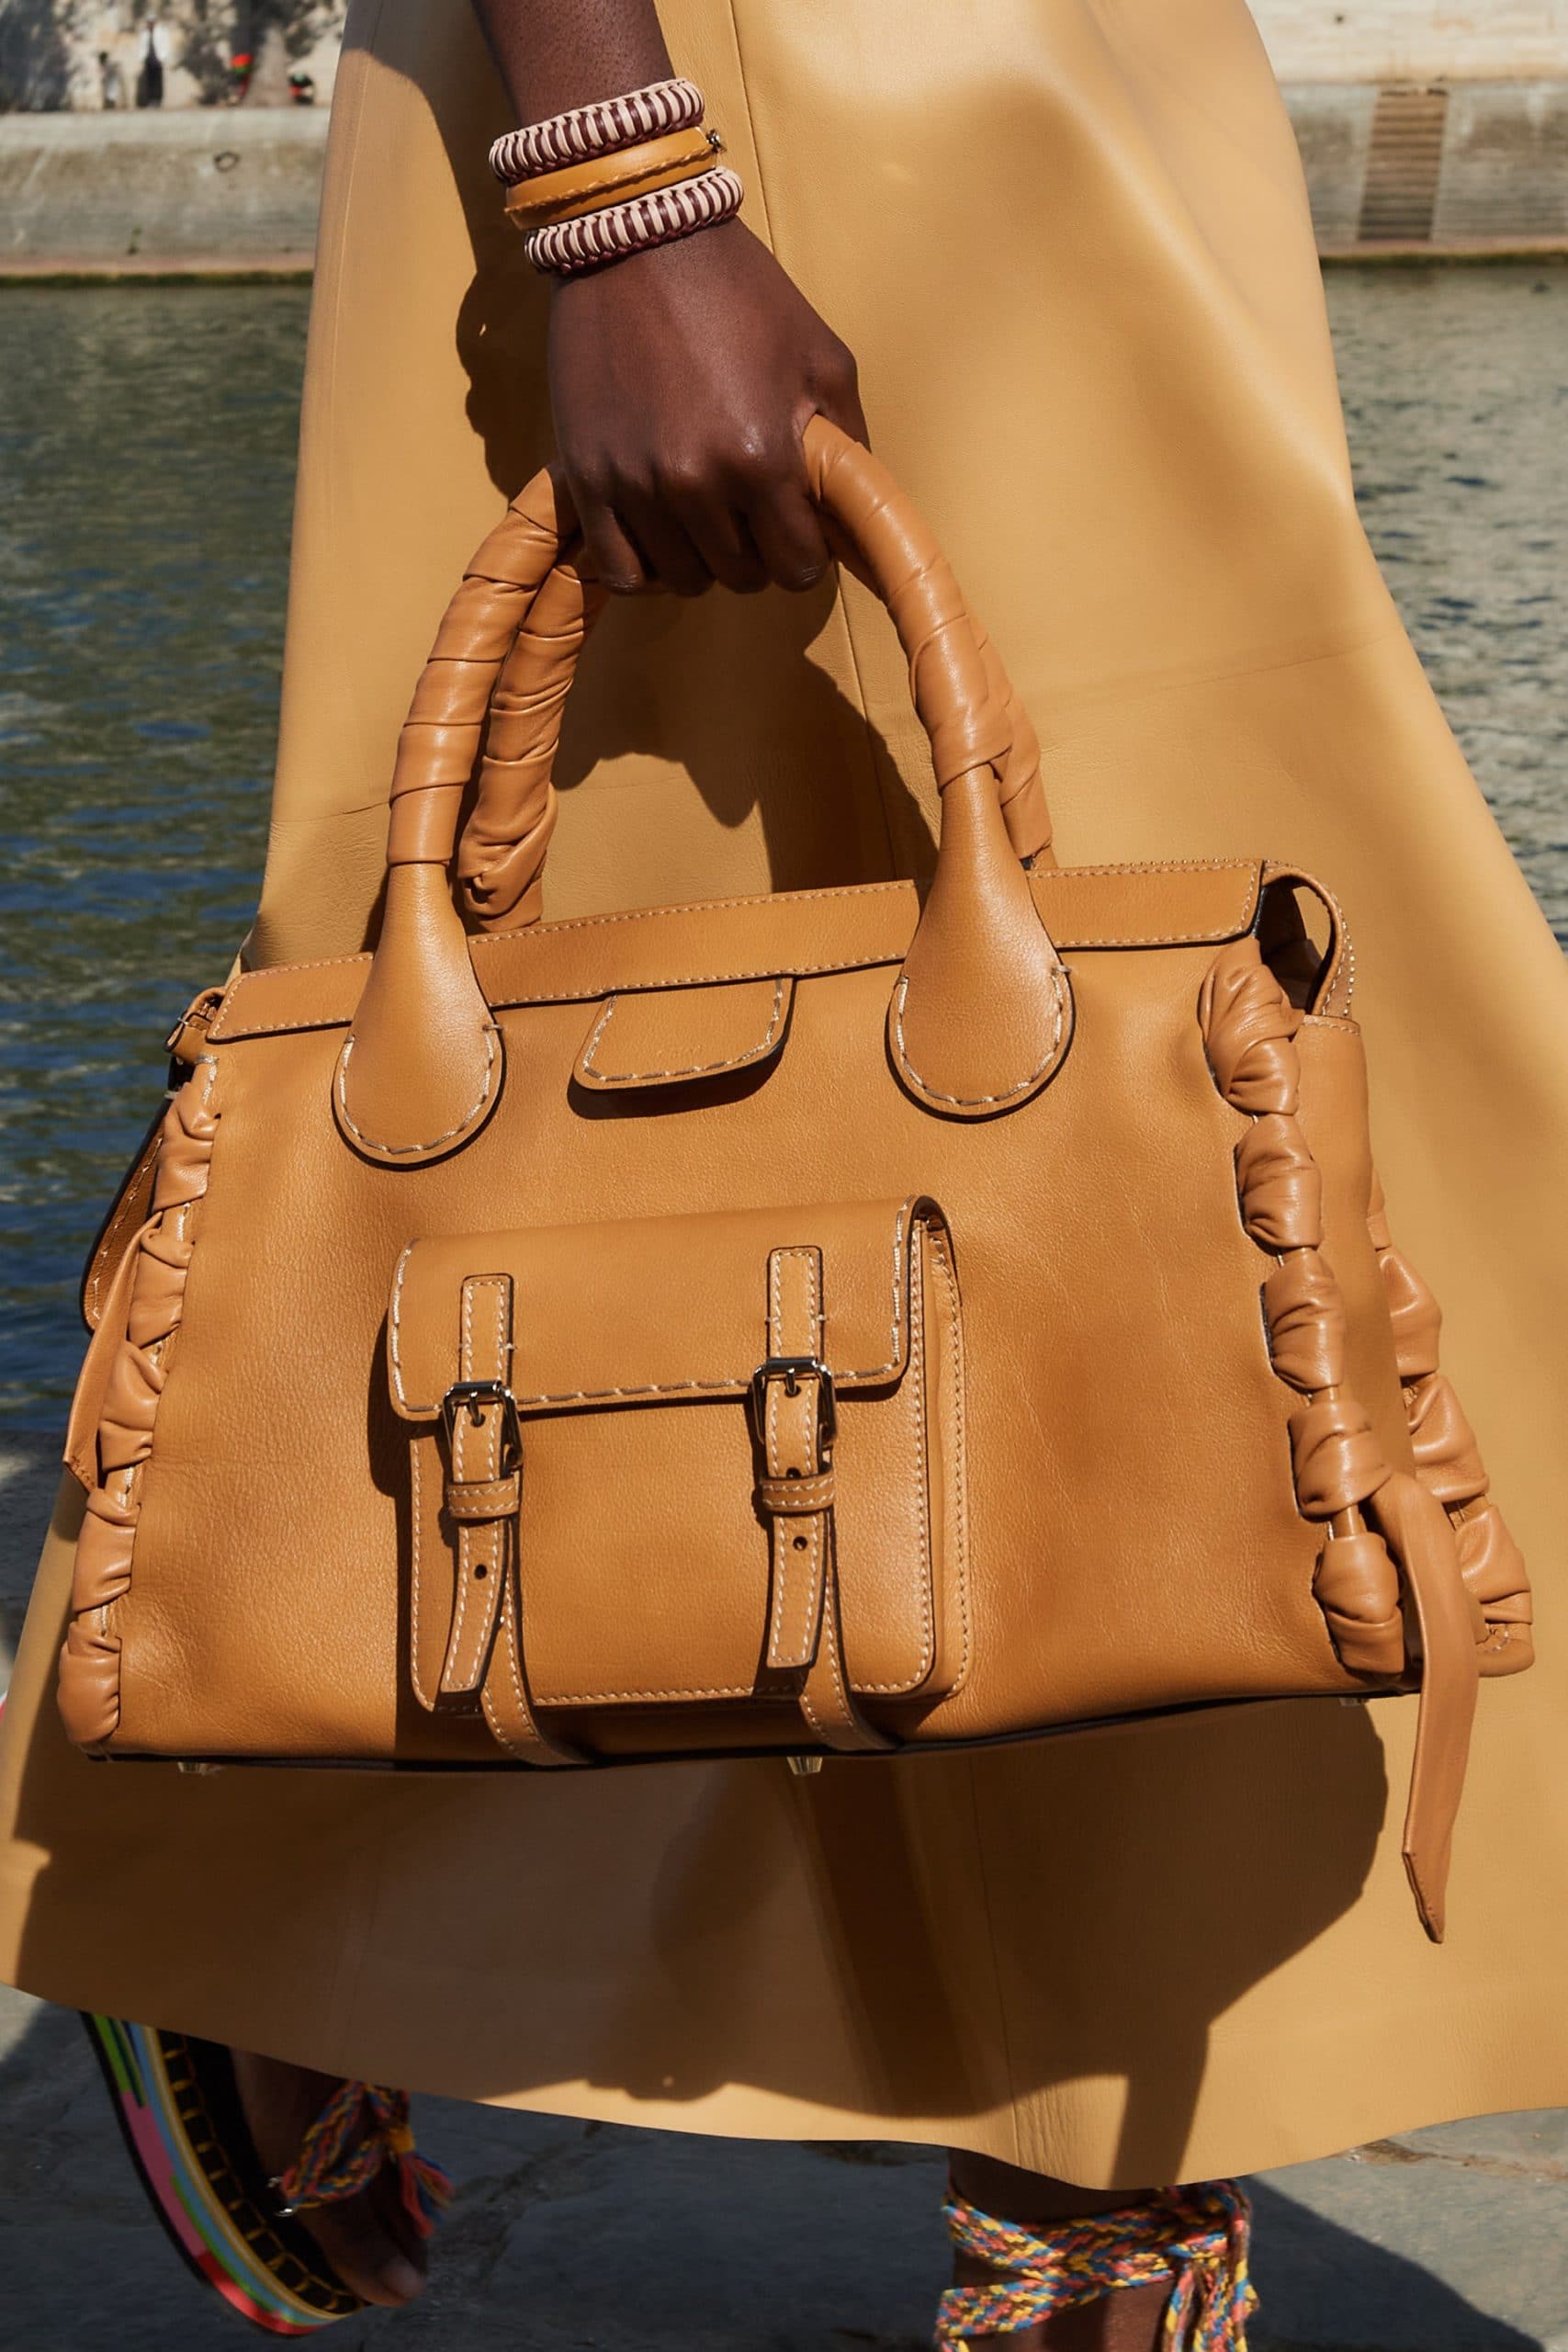 Chloé Spring Summer 2022 Runway Bags Collection - Spotted Fashion